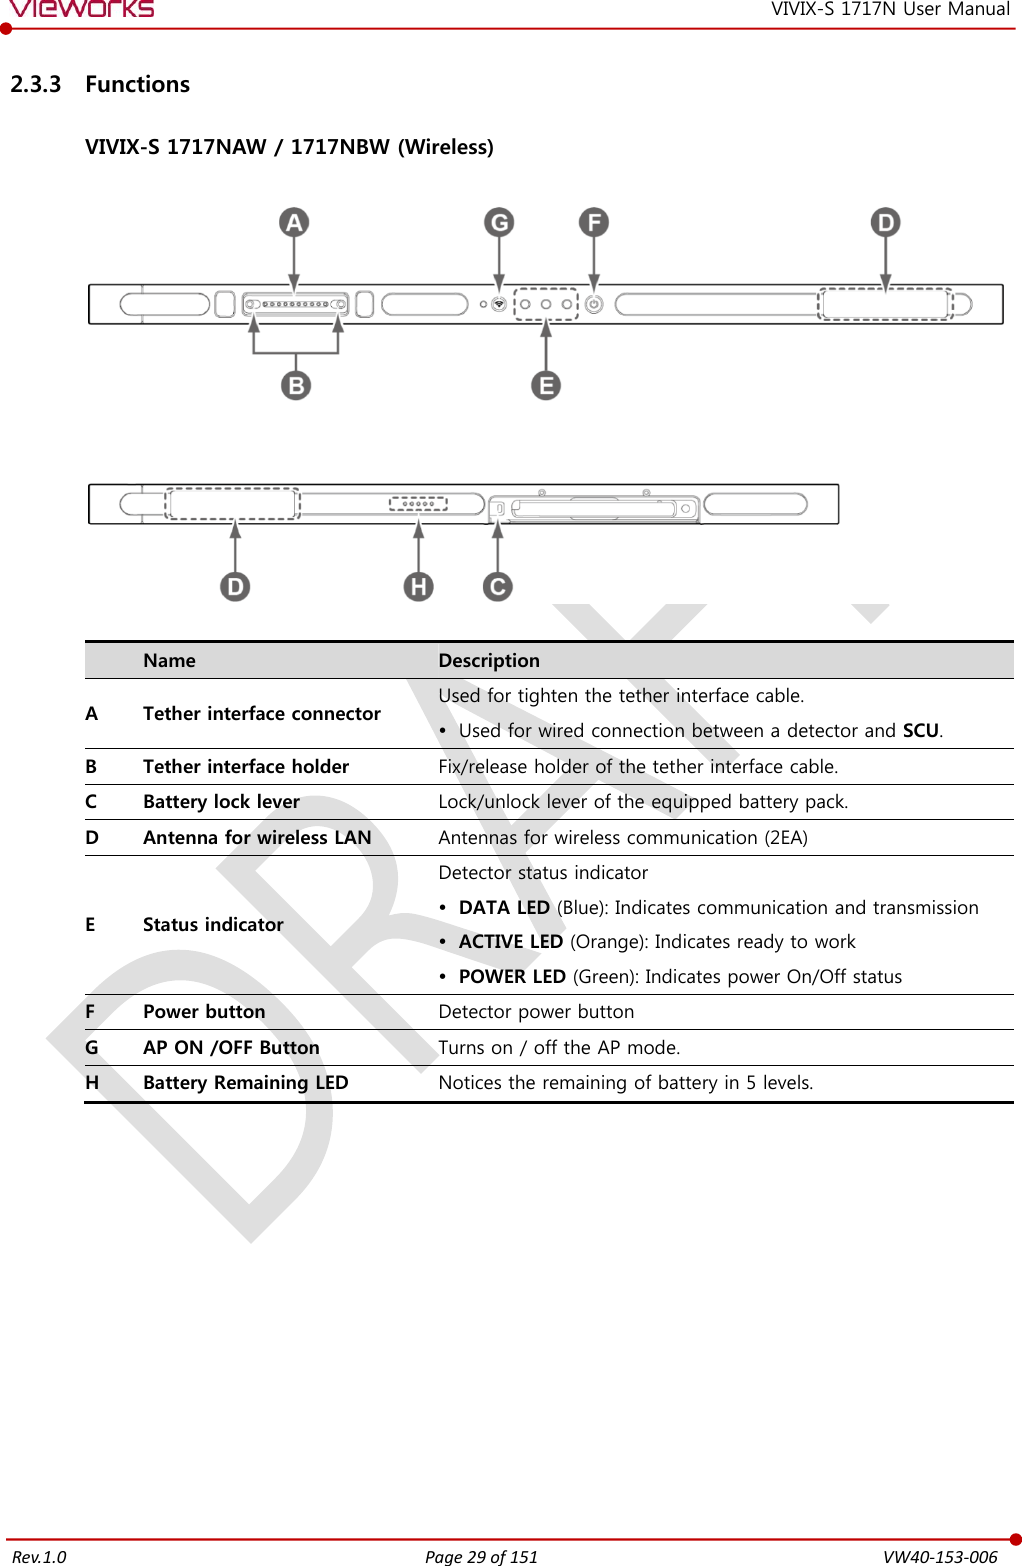   Rev.1.0 Page 29 of 151  VW40-153-006 VIVIX-S 1717N User Manual 2.3.3 Functions  VIVIX-S 1717NAW / 1717NBW (Wireless)     Name Description A Tether interface connector Used for tighten the tether interface cable.  Used for wired connection between a detector and SCU. B Tether interface holder Fix/release holder of the tether interface cable. C Battery lock lever Lock/unlock lever of the equipped battery pack. D Antenna for wireless LAN Antennas for wireless communication (2EA) E Status indicator Detector status indicator  DATA LED (Blue): Indicates communication and transmission  ACTIVE LED (Orange): Indicates ready to work  POWER LED (Green): Indicates power On/Off status F Power button Detector power button G AP ON /OFF Button Turns on / off the AP mode. H Battery Remaining LED Notices the remaining of battery in 5 levels.           